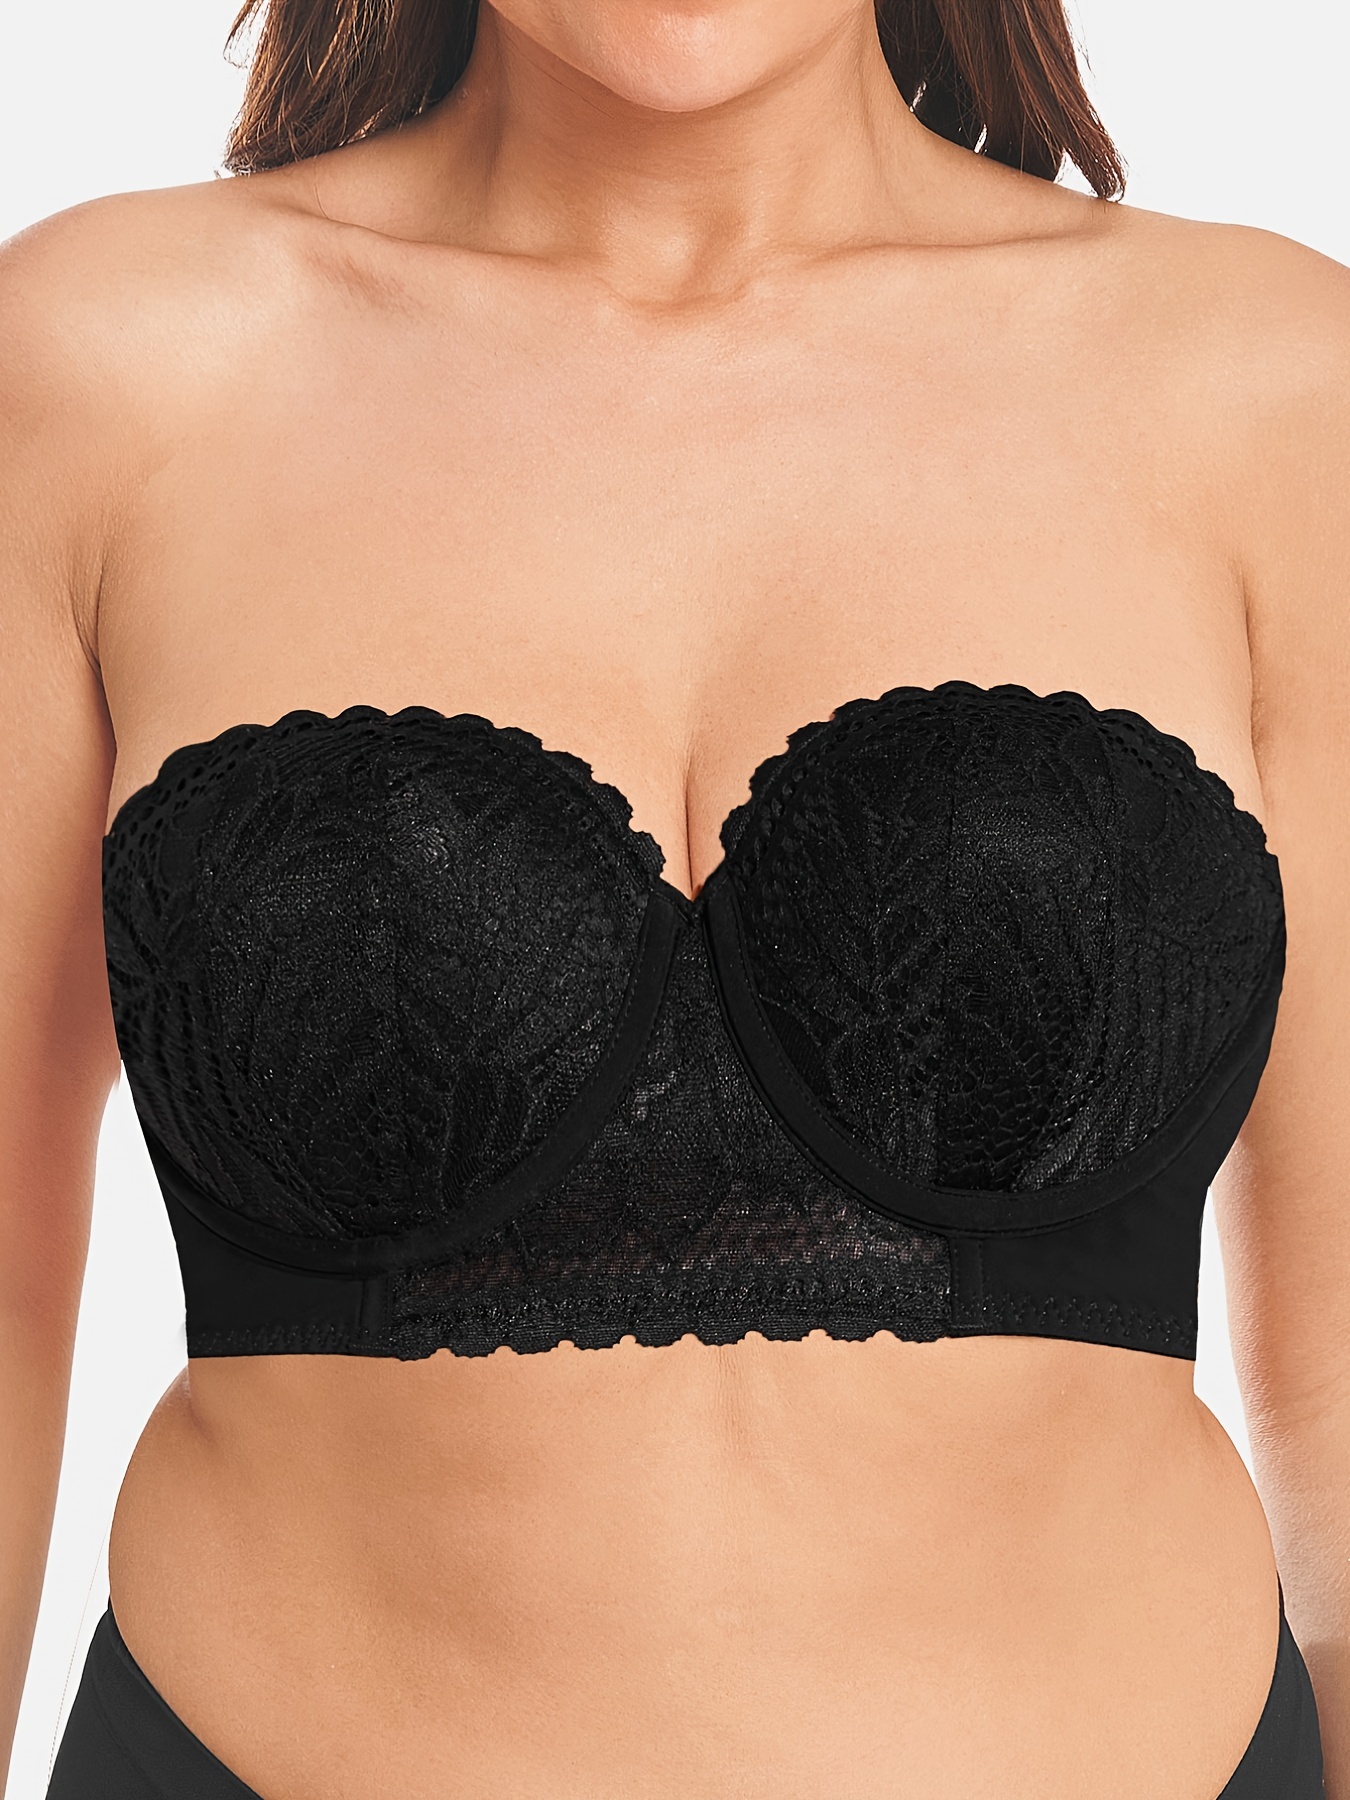 Push Up Strapless Bra for Women Plus Size Padded Underwire